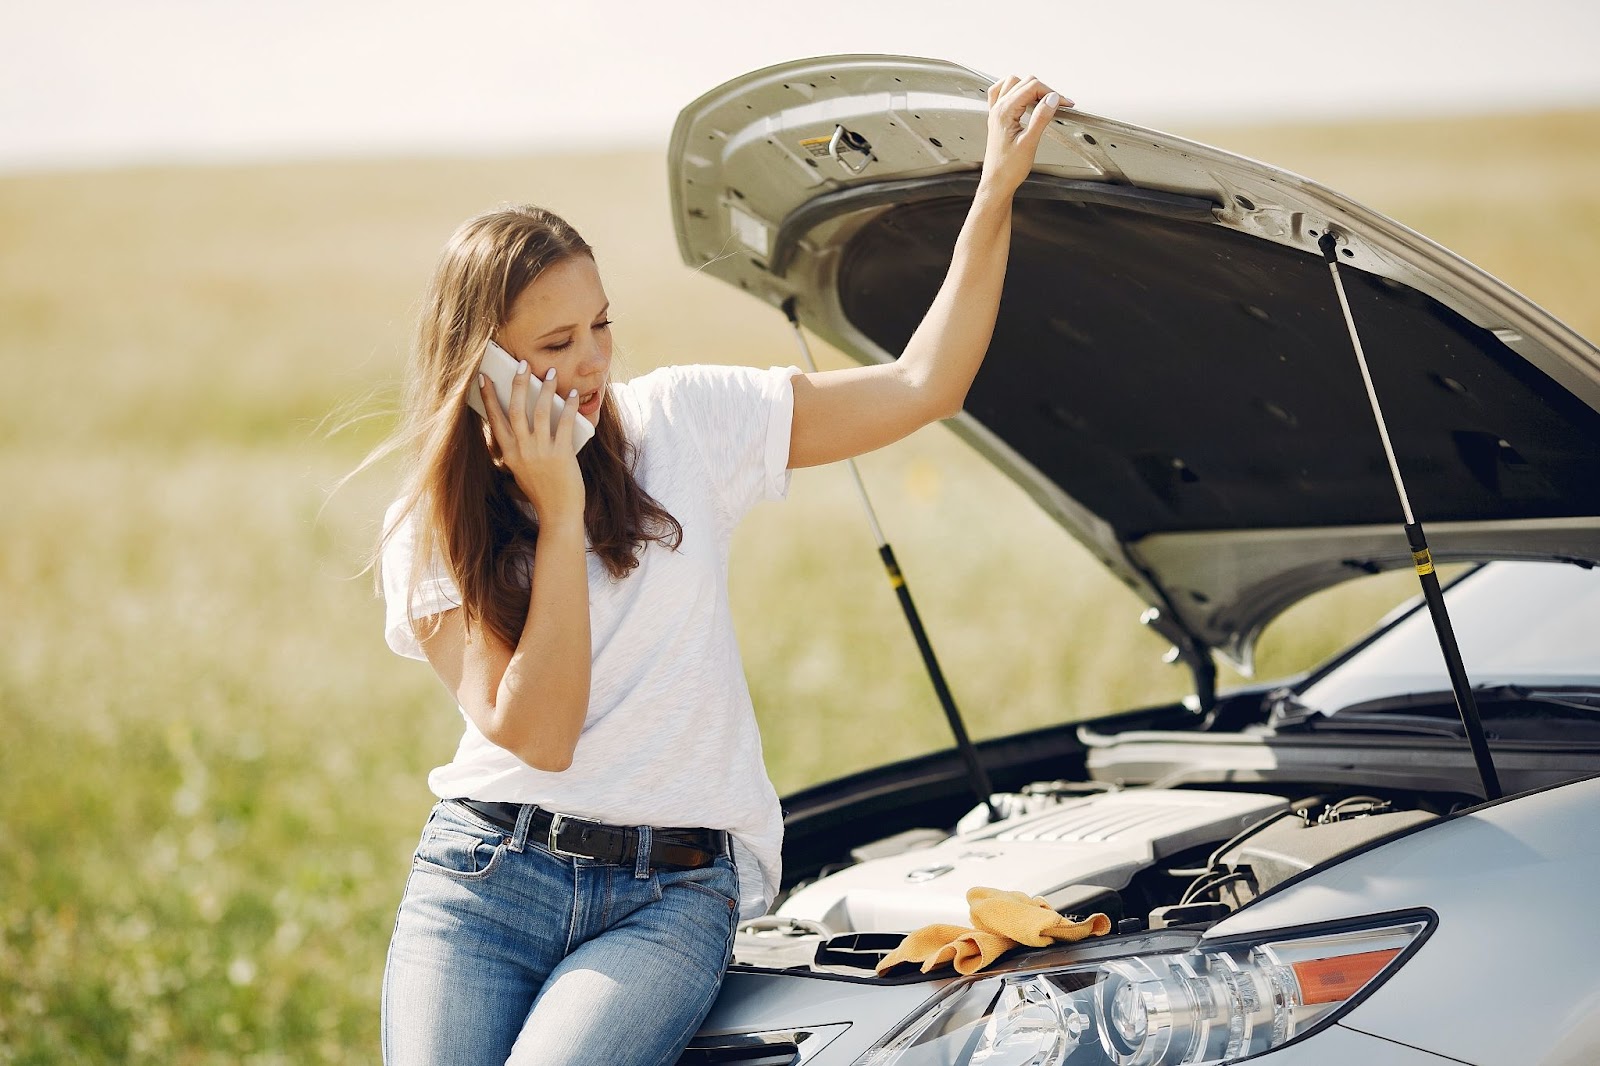 How to Handle a Car Accident While on Vacation?